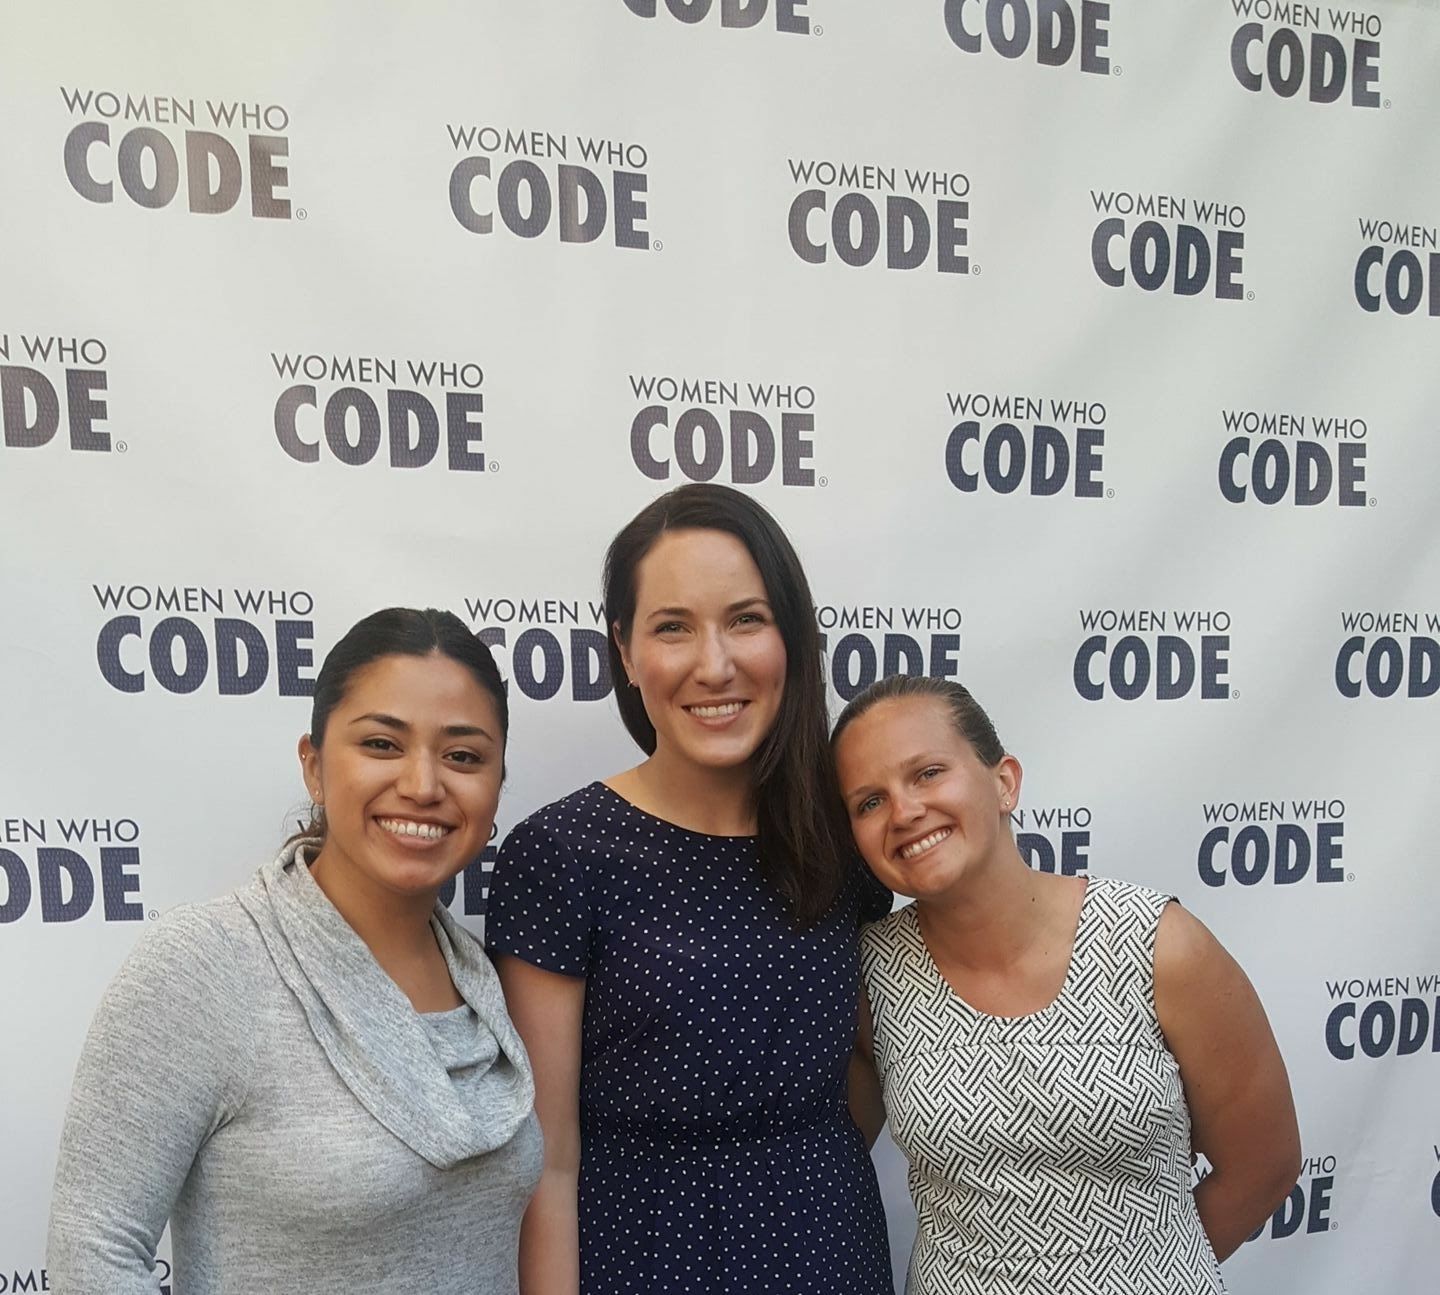 Our Road to Rising Up: Procore attends Women Who Code